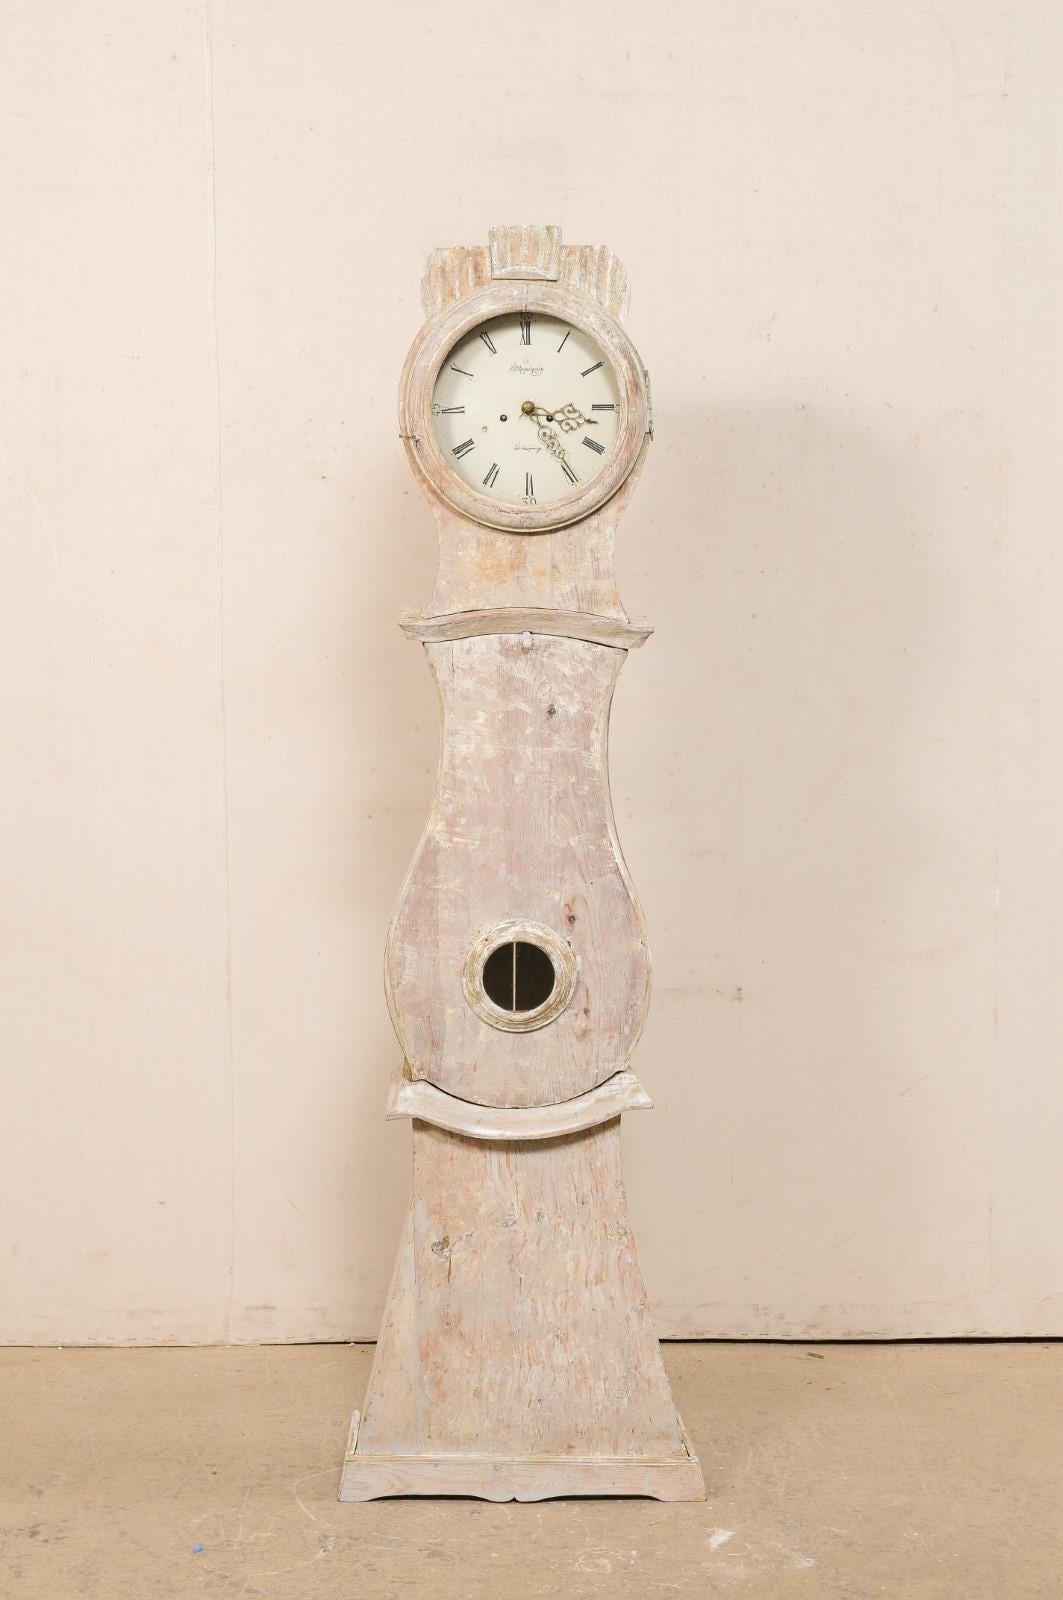 An early 19th century Swedish grandfather clock with scraped finish. This antique floor clock from central Sweden is from the 1820's and features a carved & raised crest, its original round metal face & movements, a raindrop shaped belly, a curvy